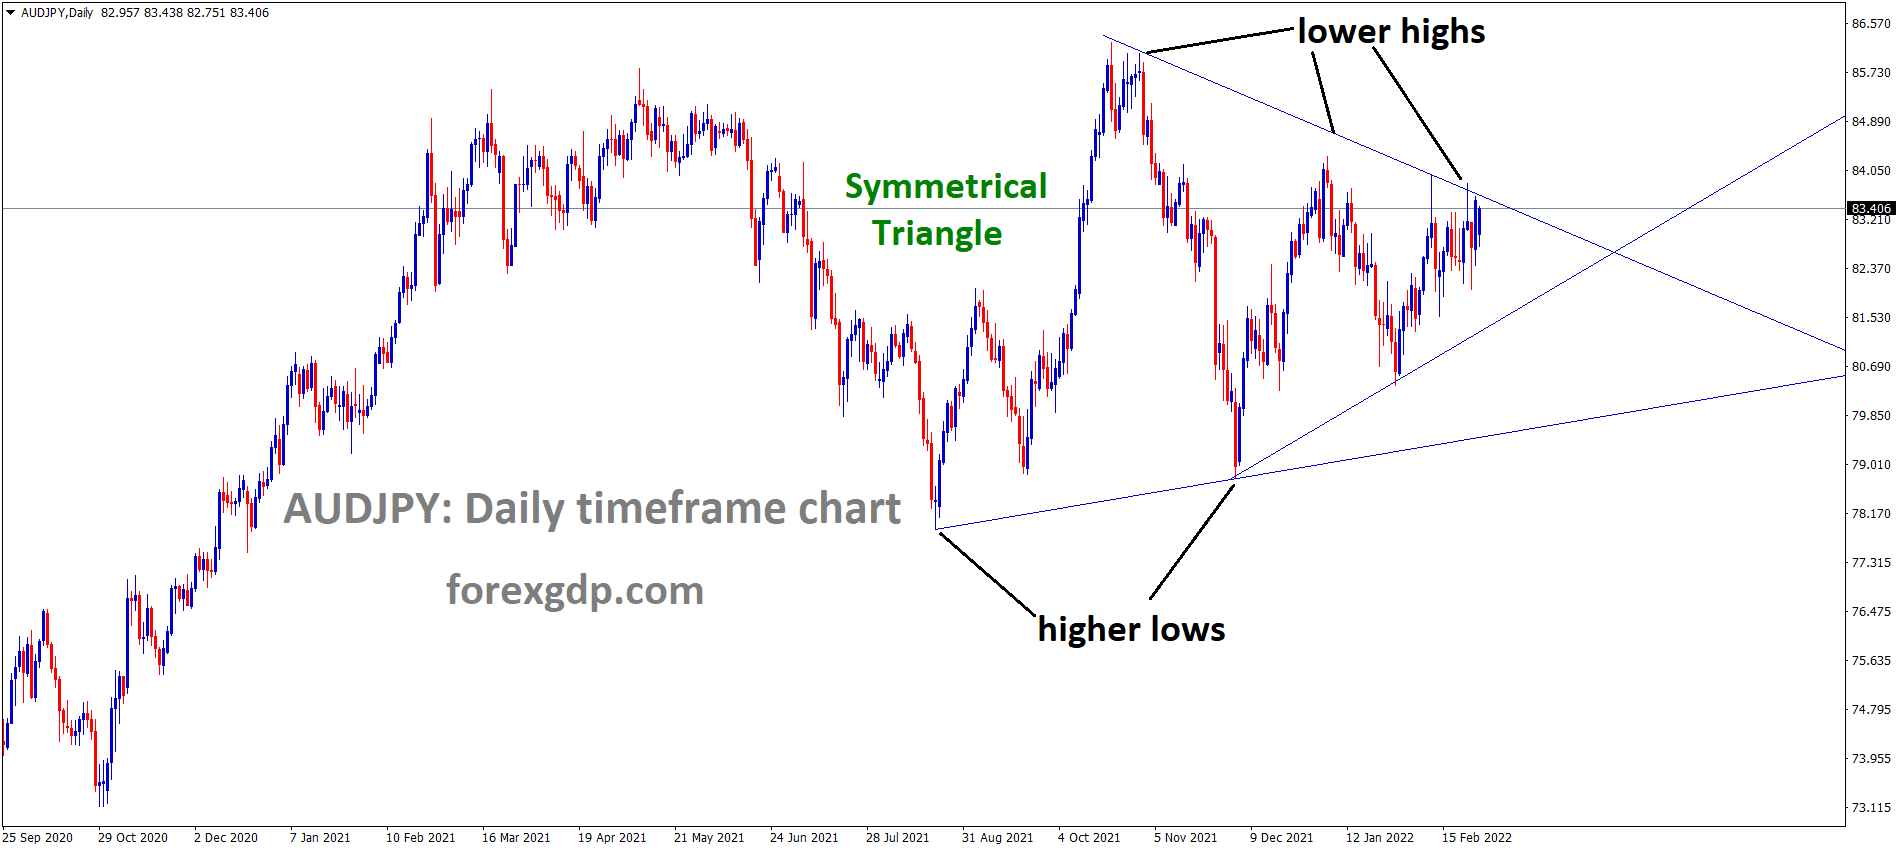 AUDJPY is moving in the Symmetrical triangle pattern and the market has reached the Top area of the pattern.